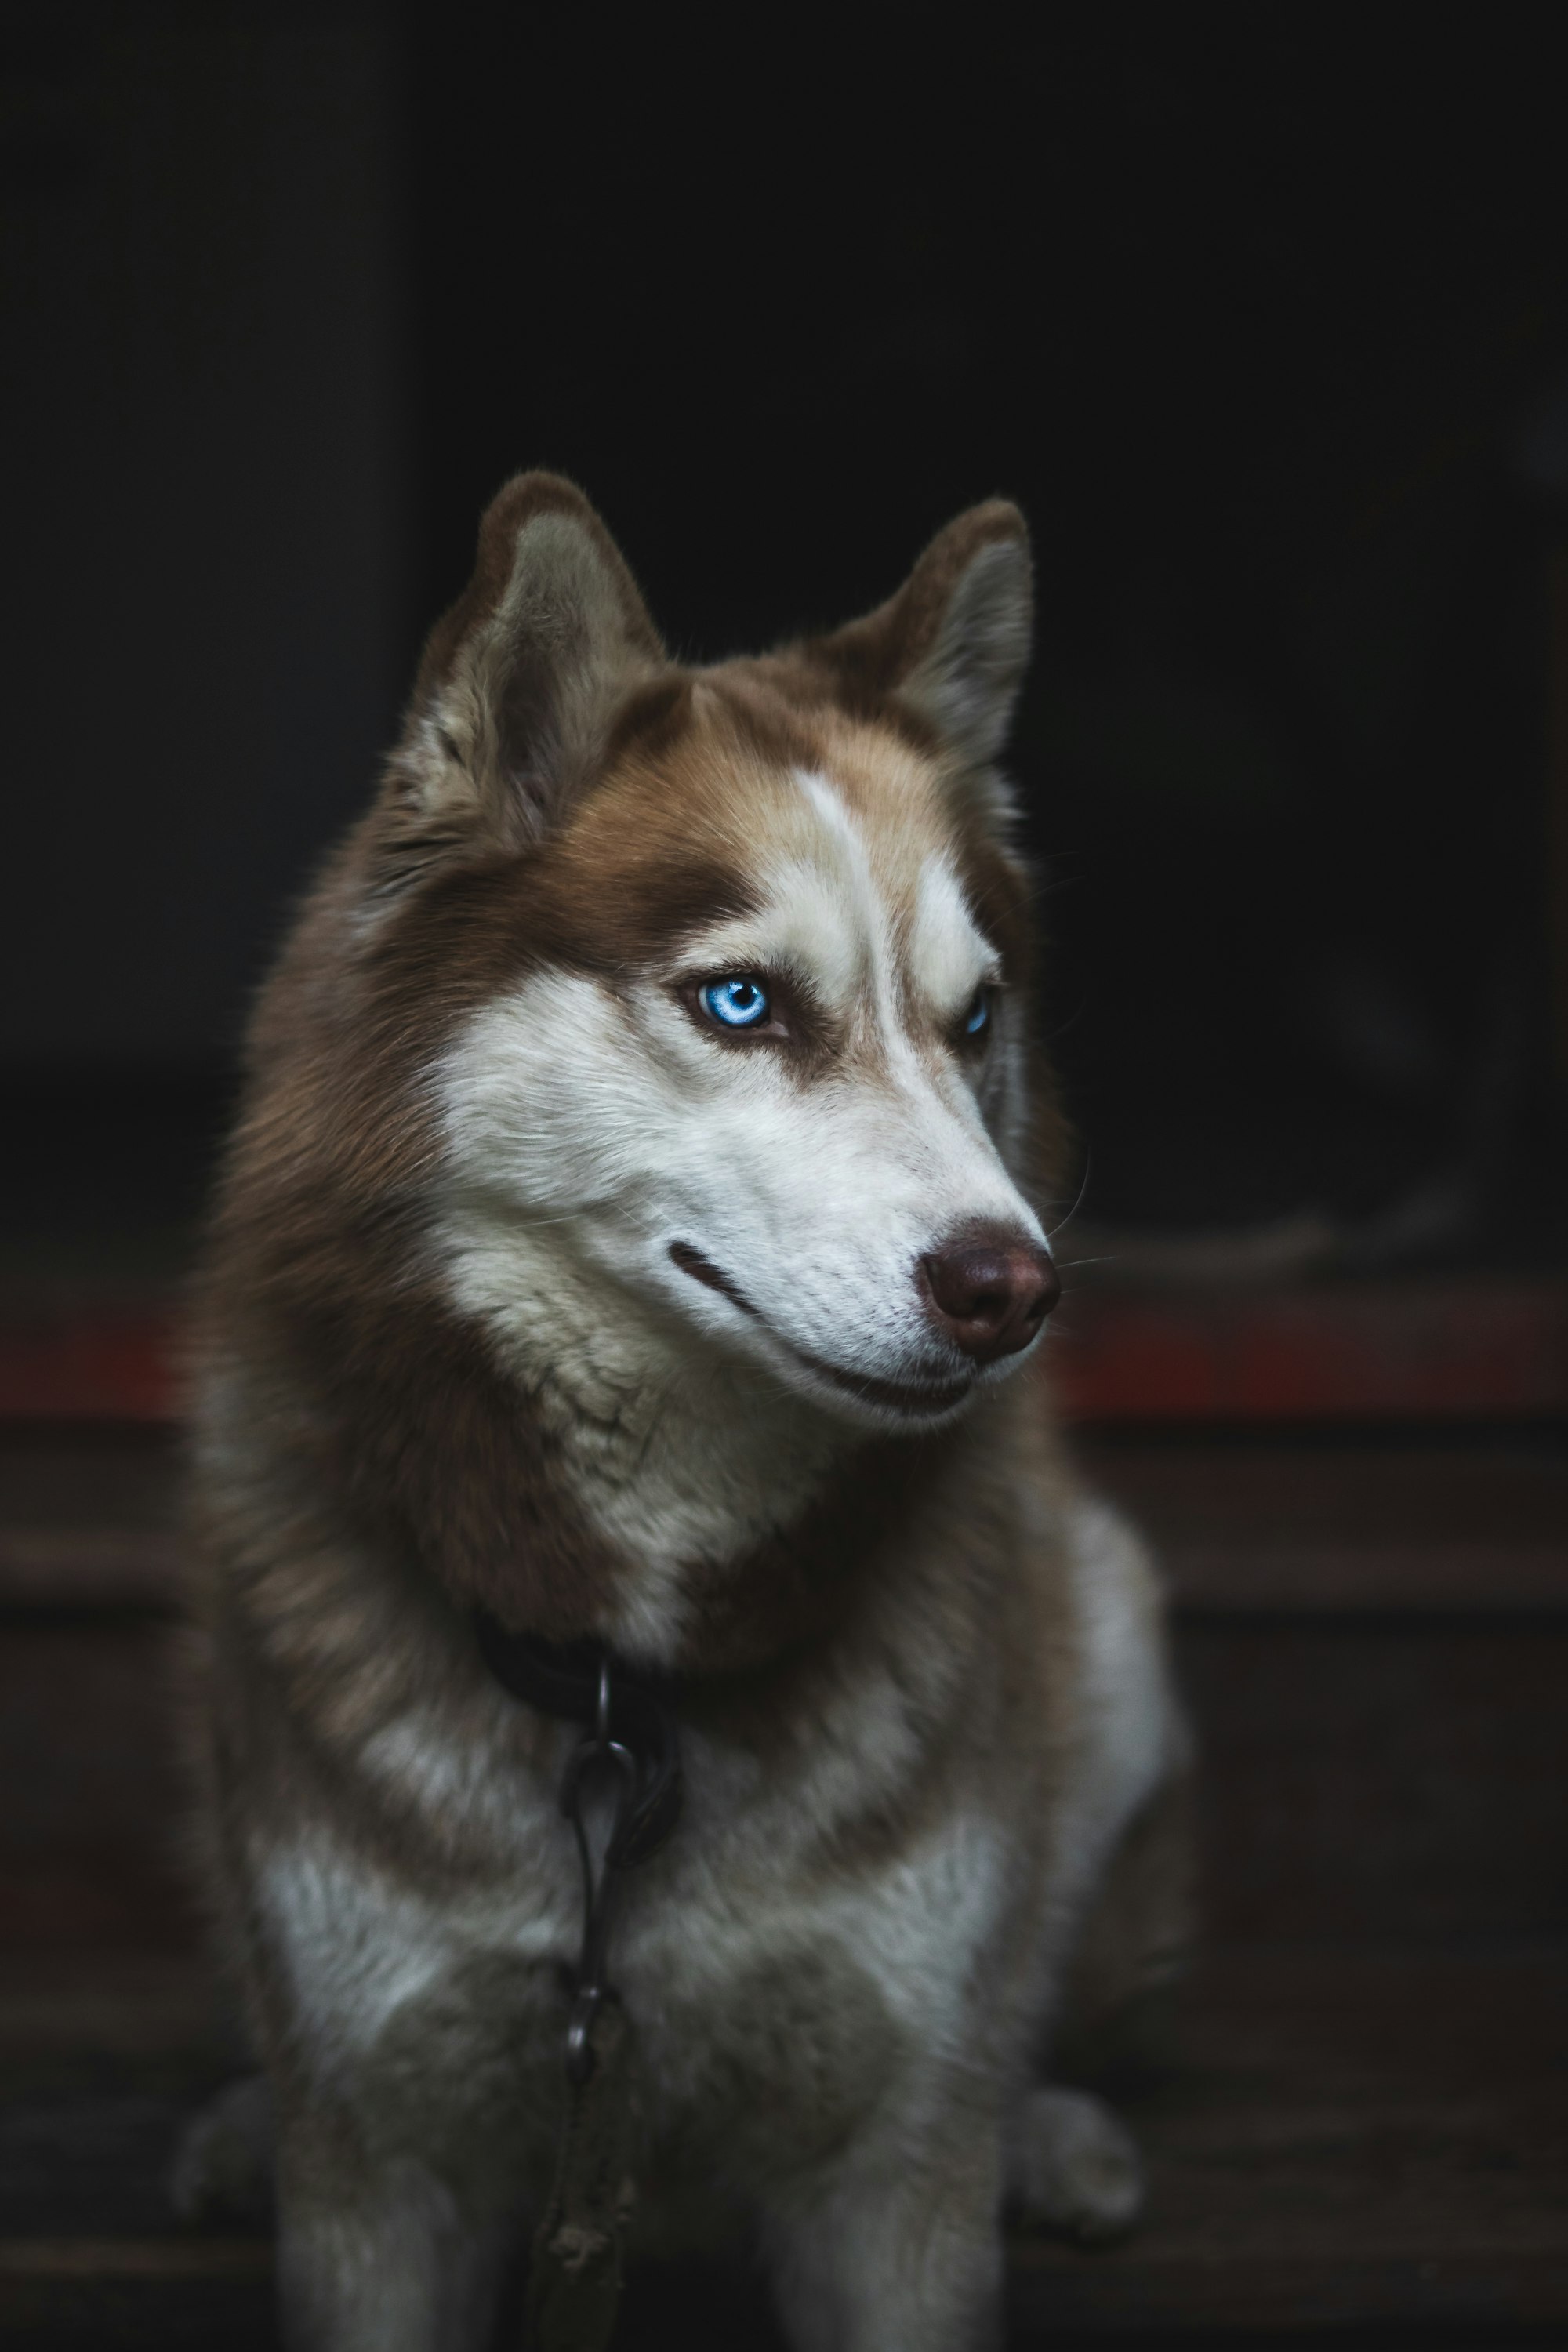 Good-looking husky portrait with her charming eyes